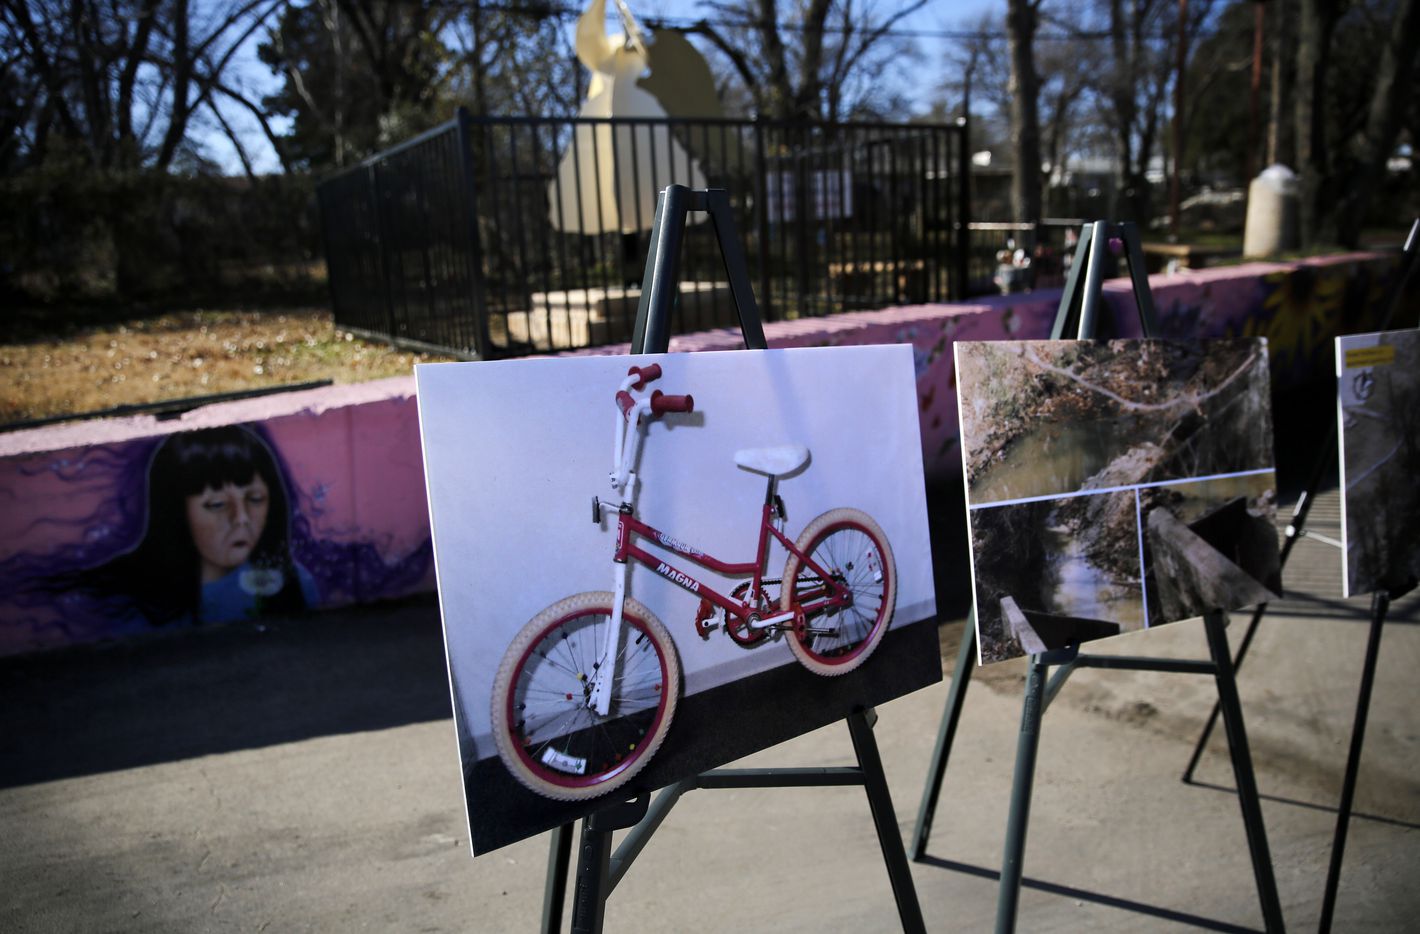 Arlington Police displayed a photo of Amber Hagerman's bicycle she was riding when abducted...